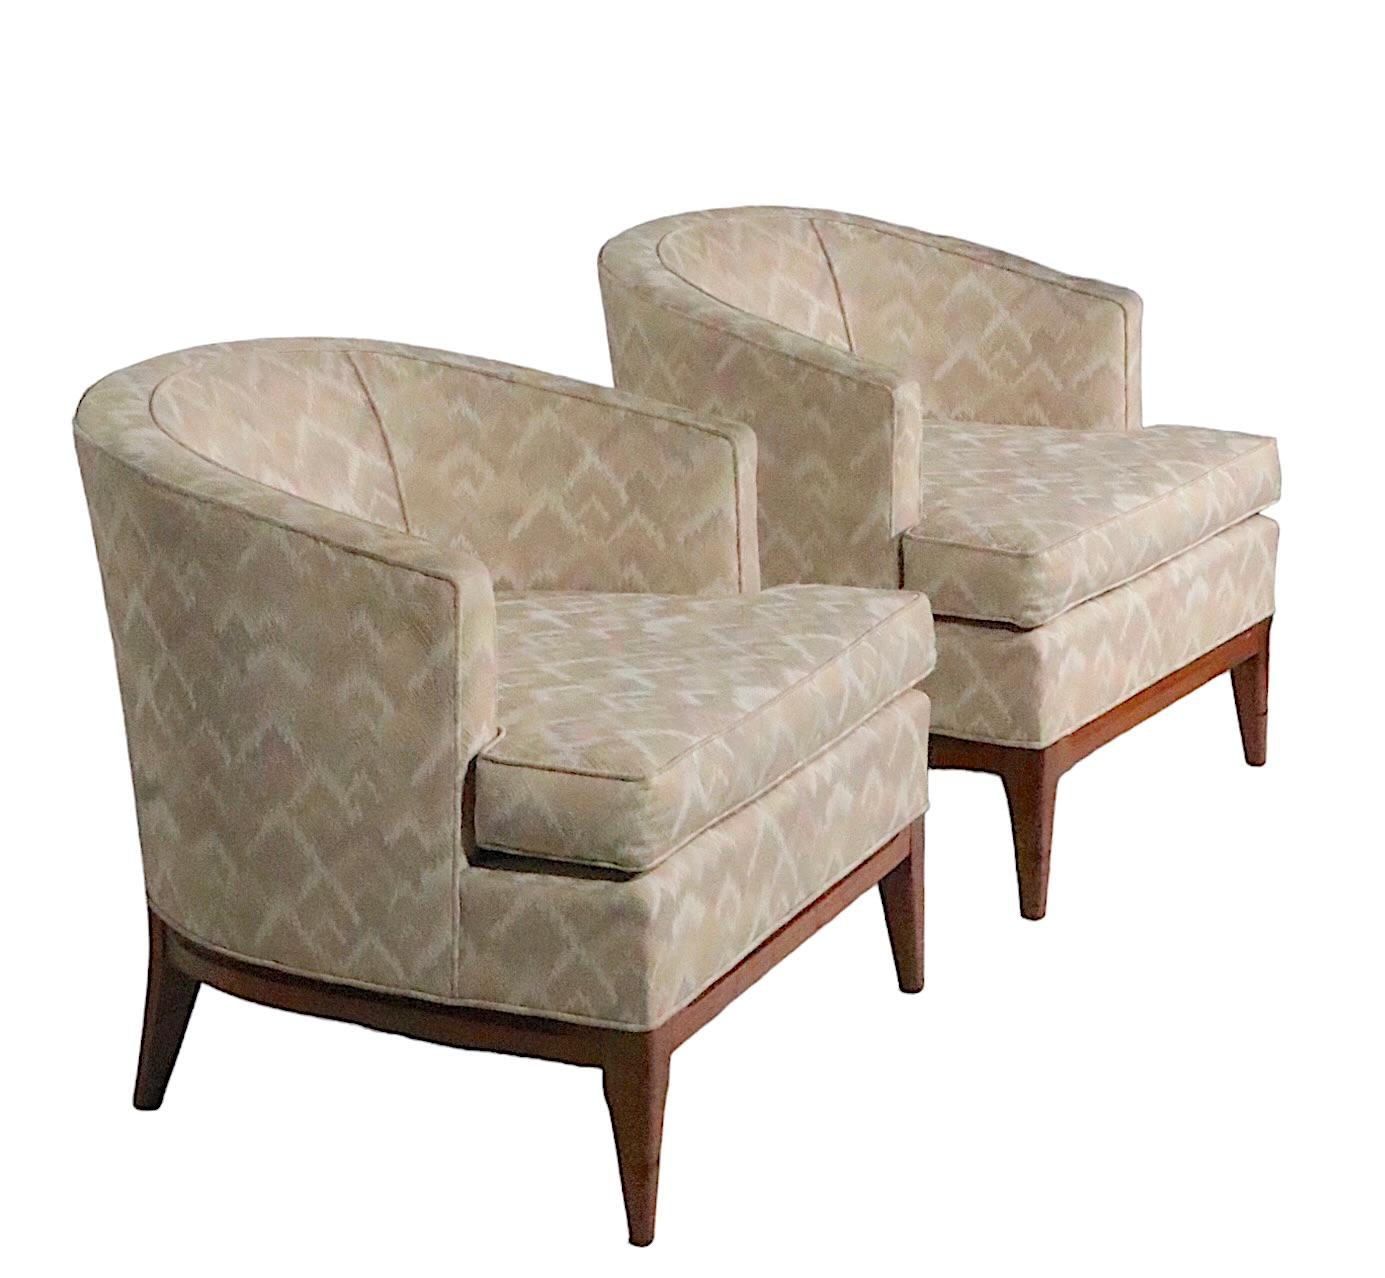 Hollywood Regency Pair. Mid Century Tub Chairs After Robsjohn Gibbings, circa 1950 - 1960s For Sale